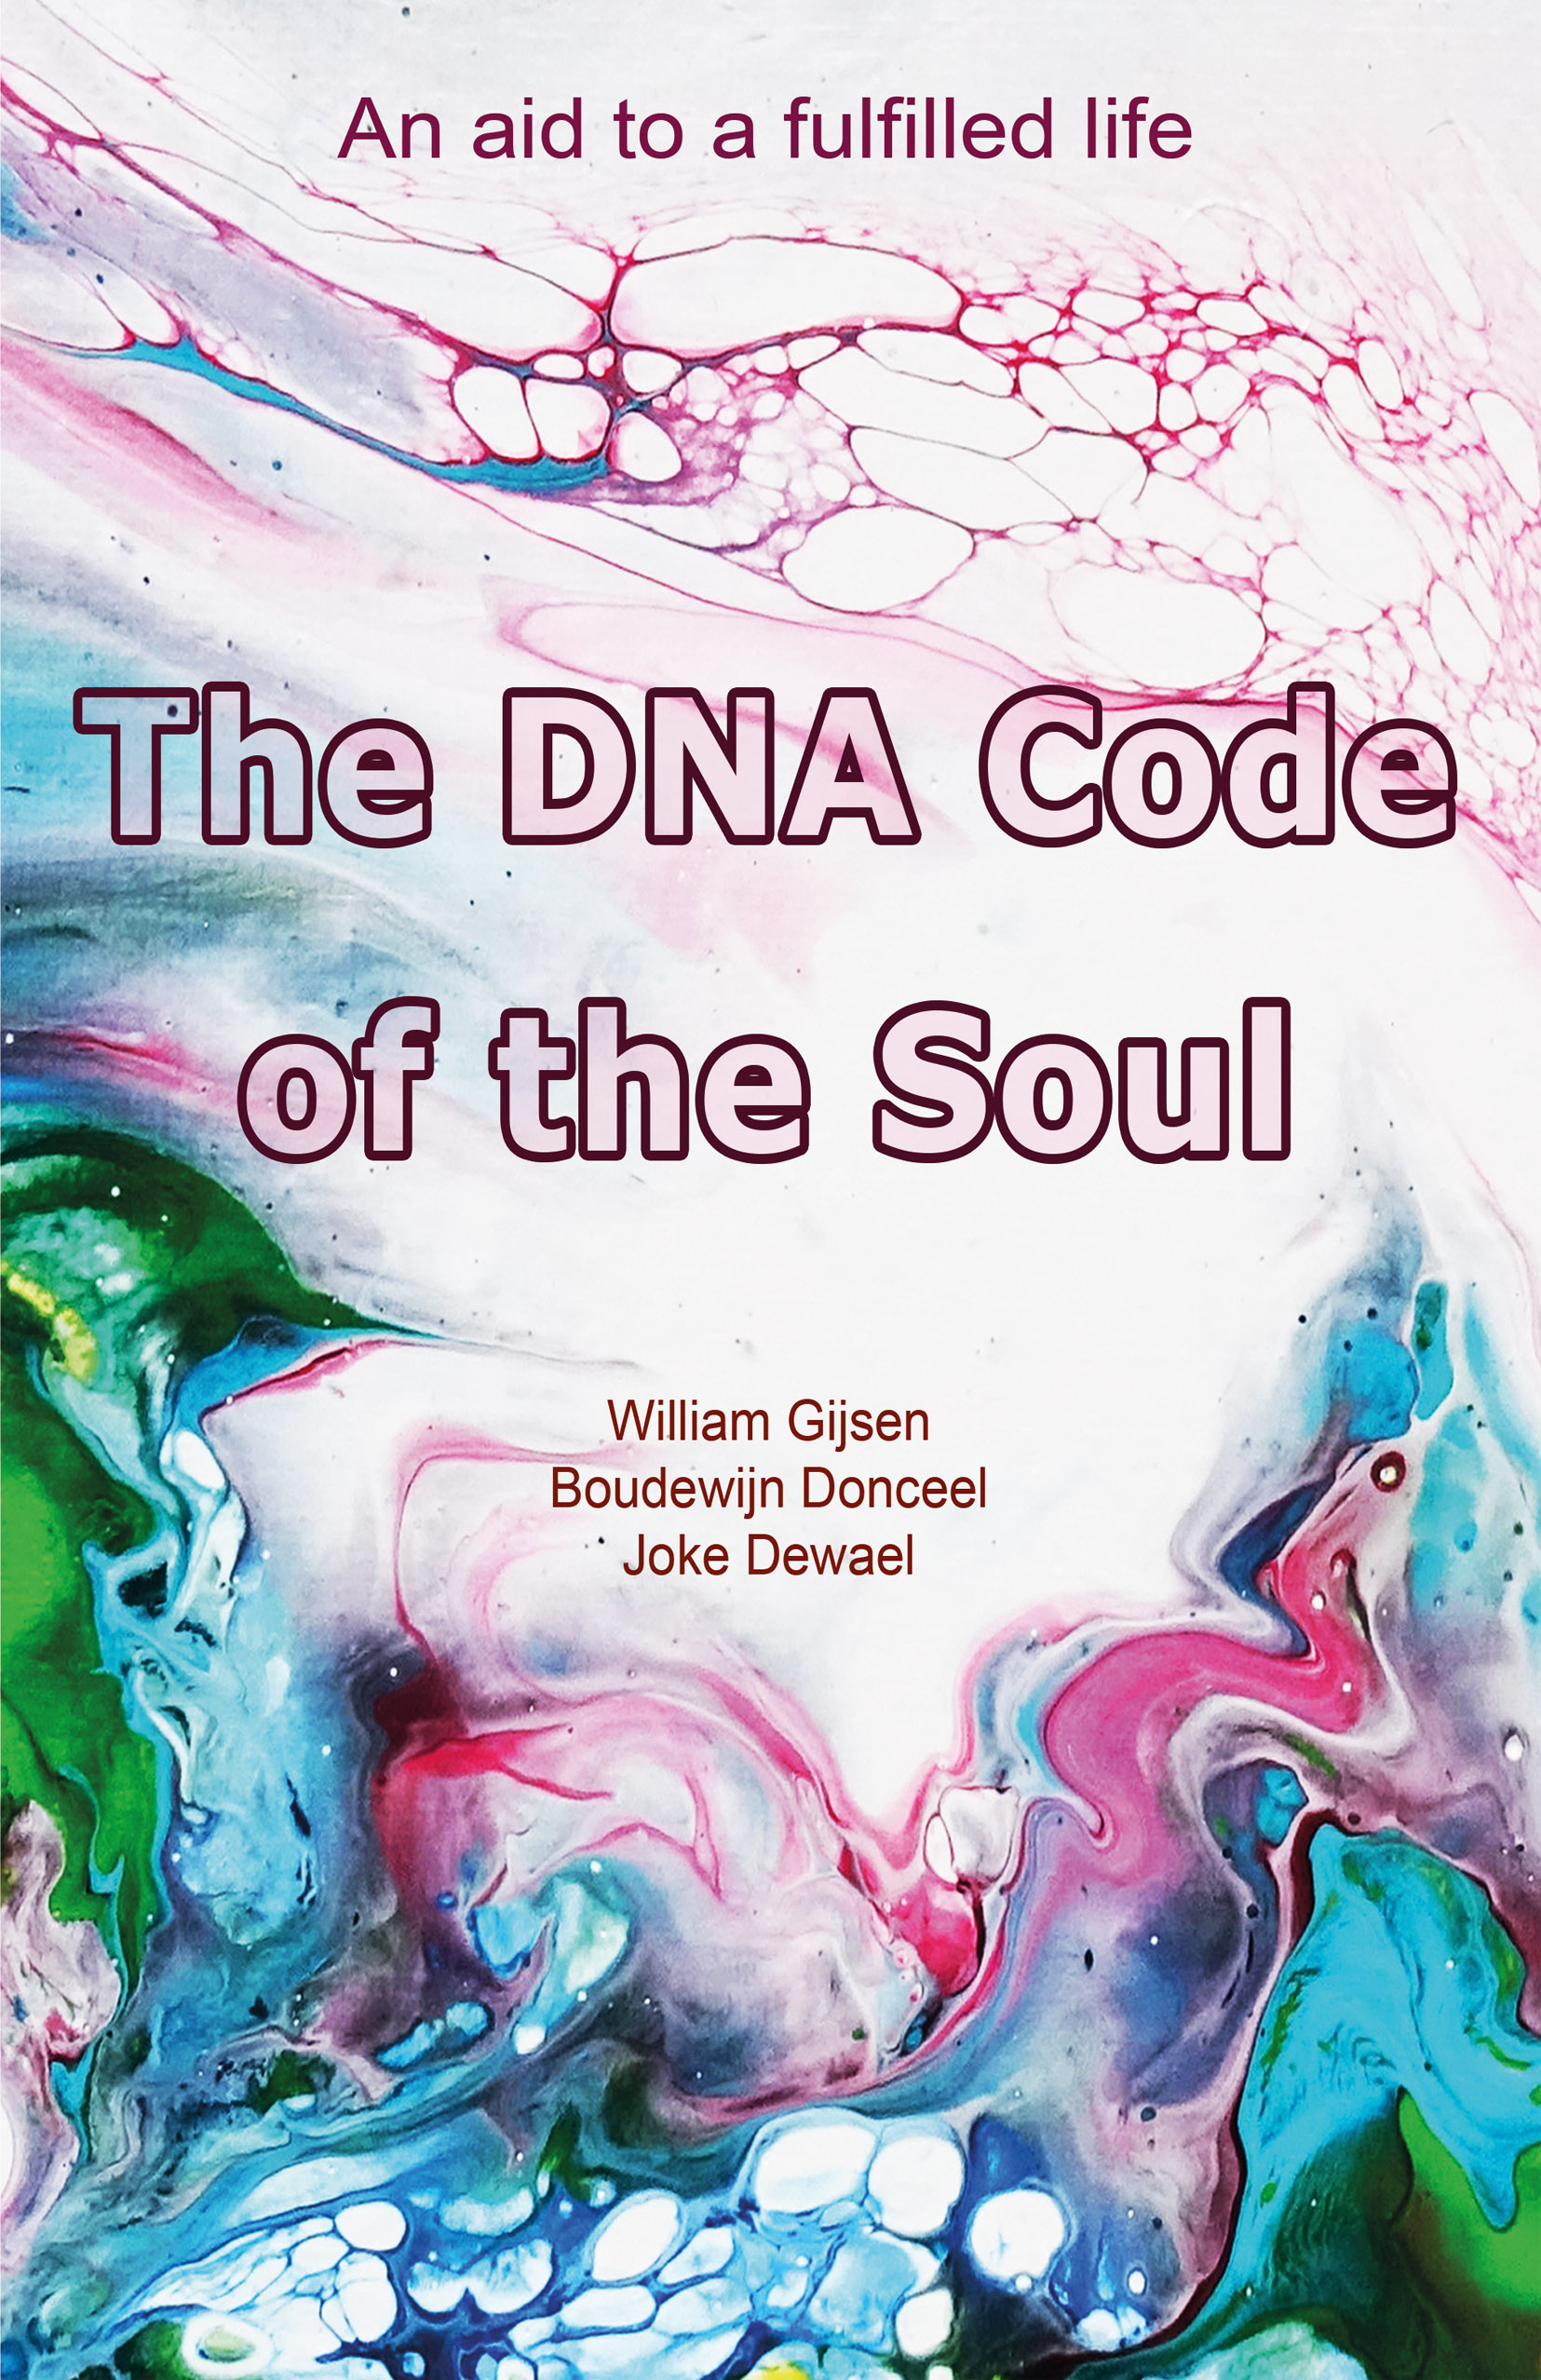 The DNA Code of the Soul - An aid to a fulfilled life main image